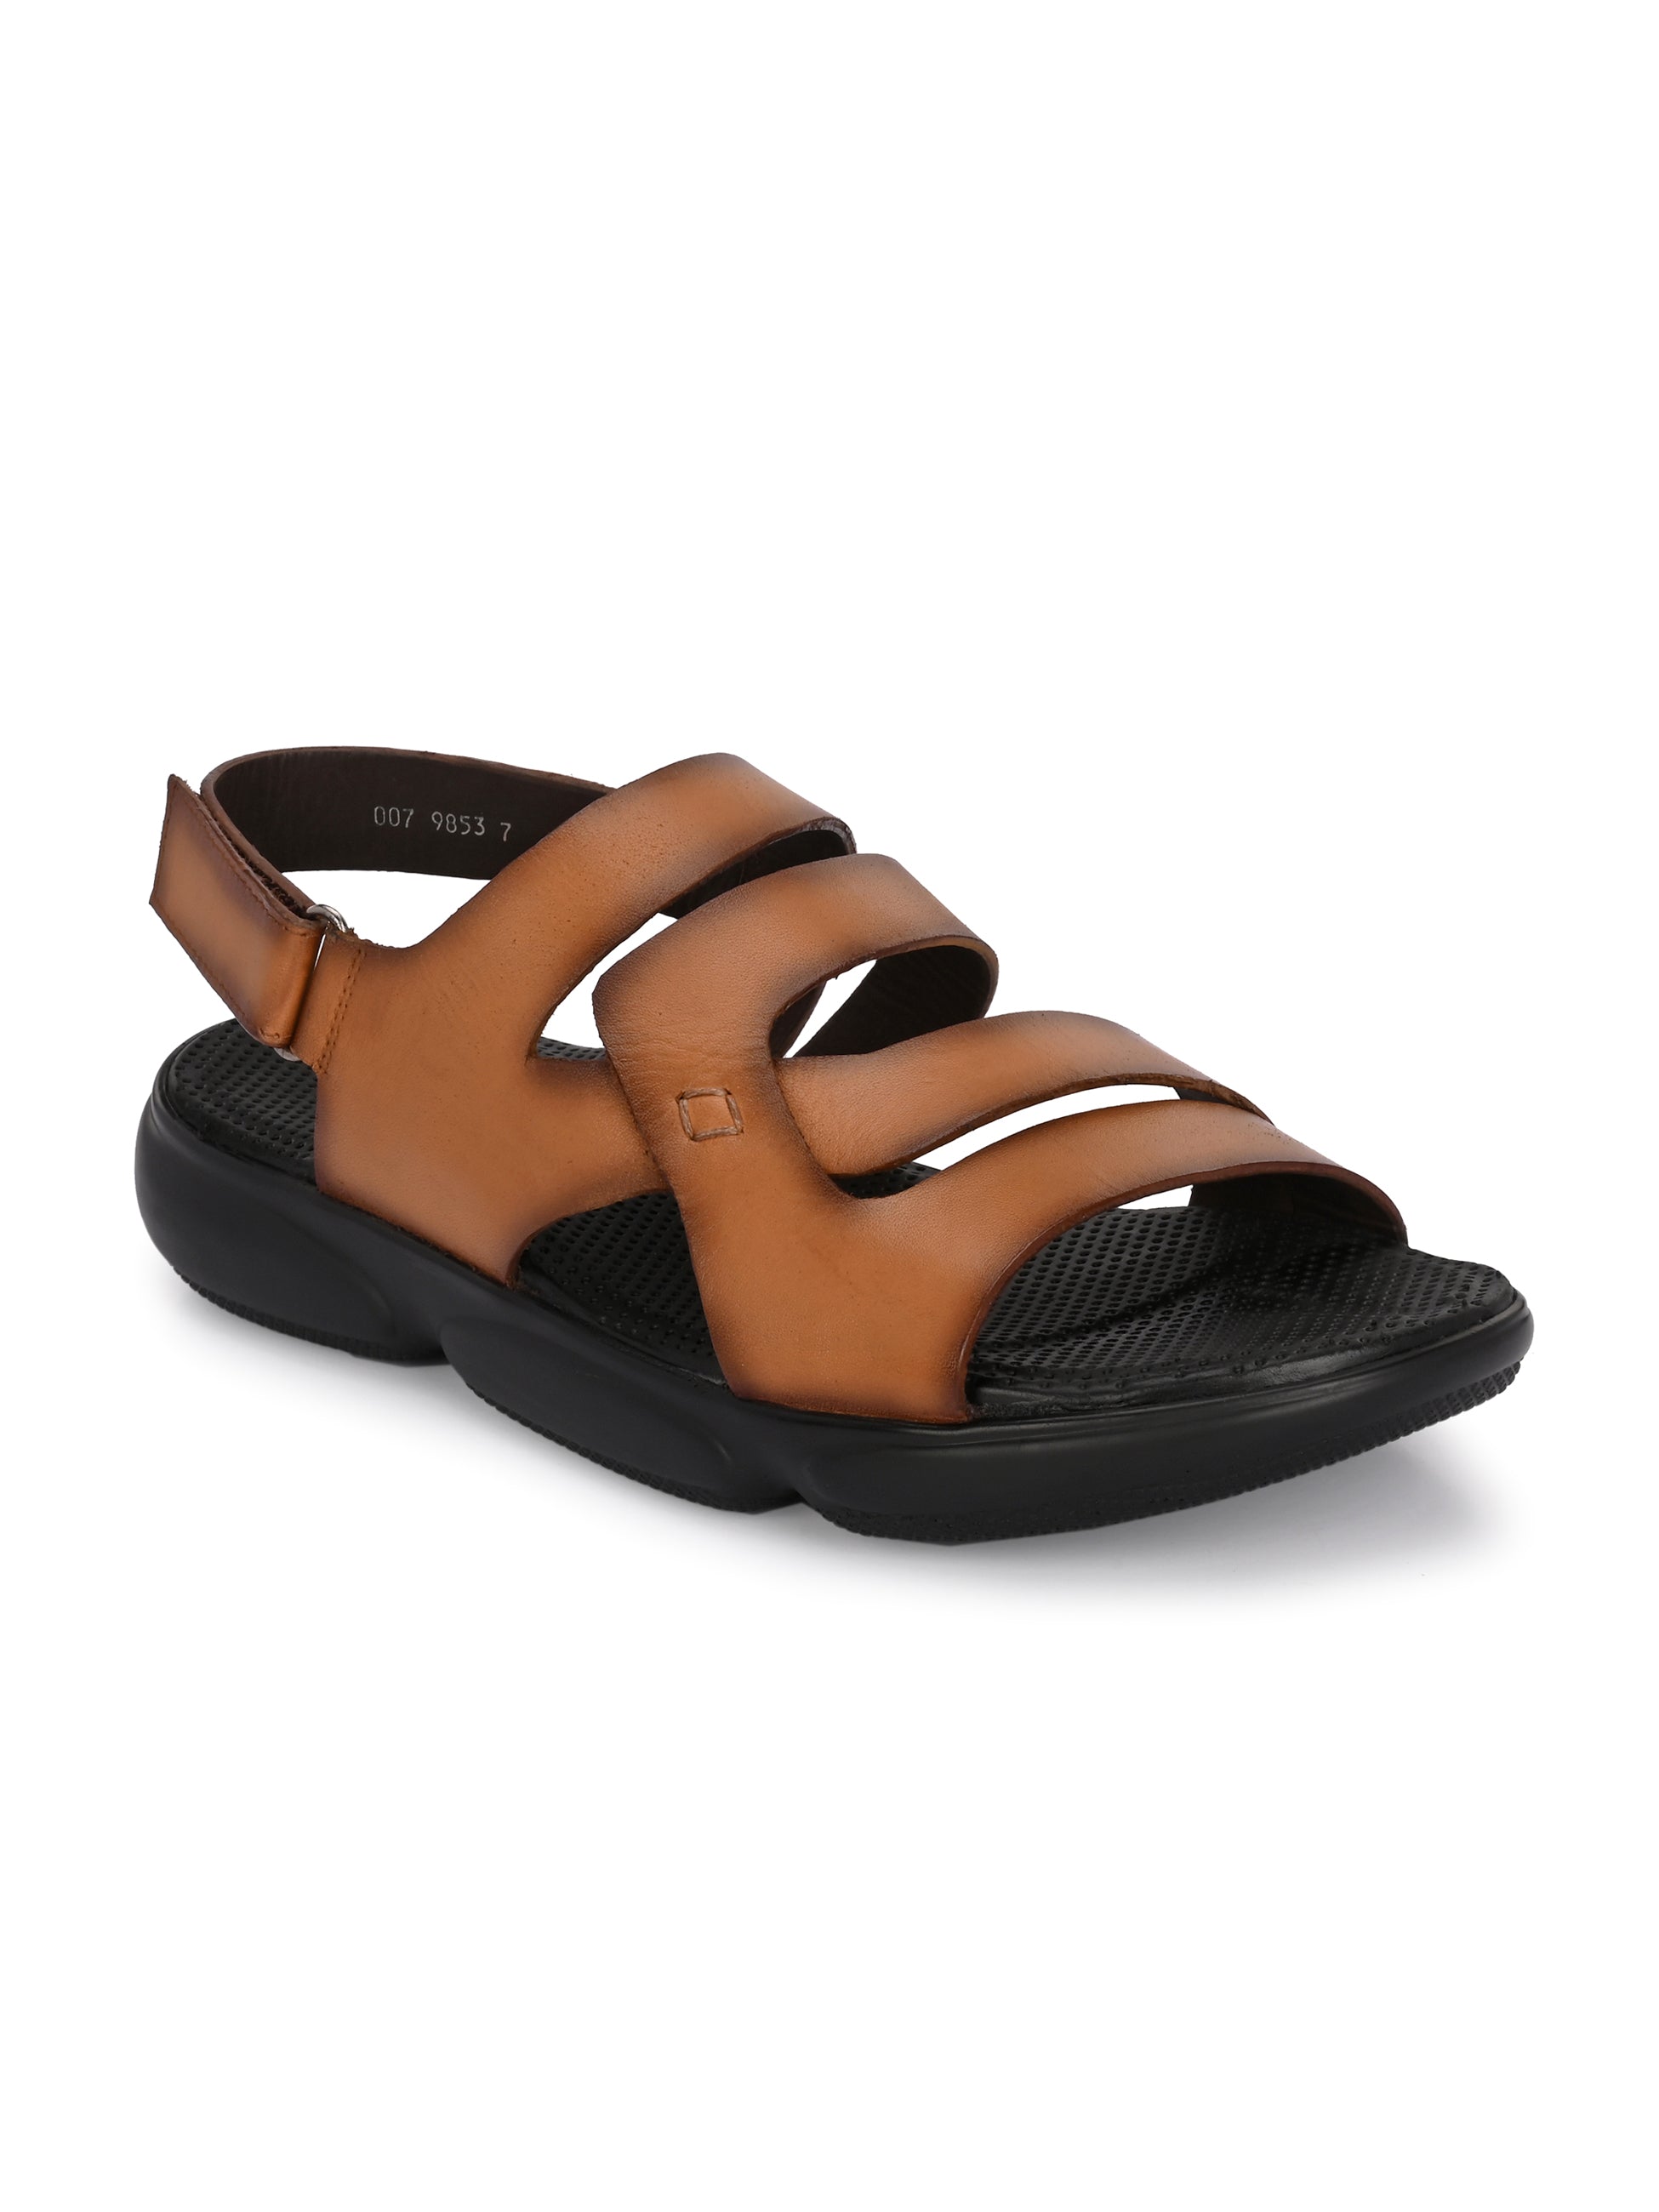 7 Tips To Consider While Buying Women's Sandals Online That Fit